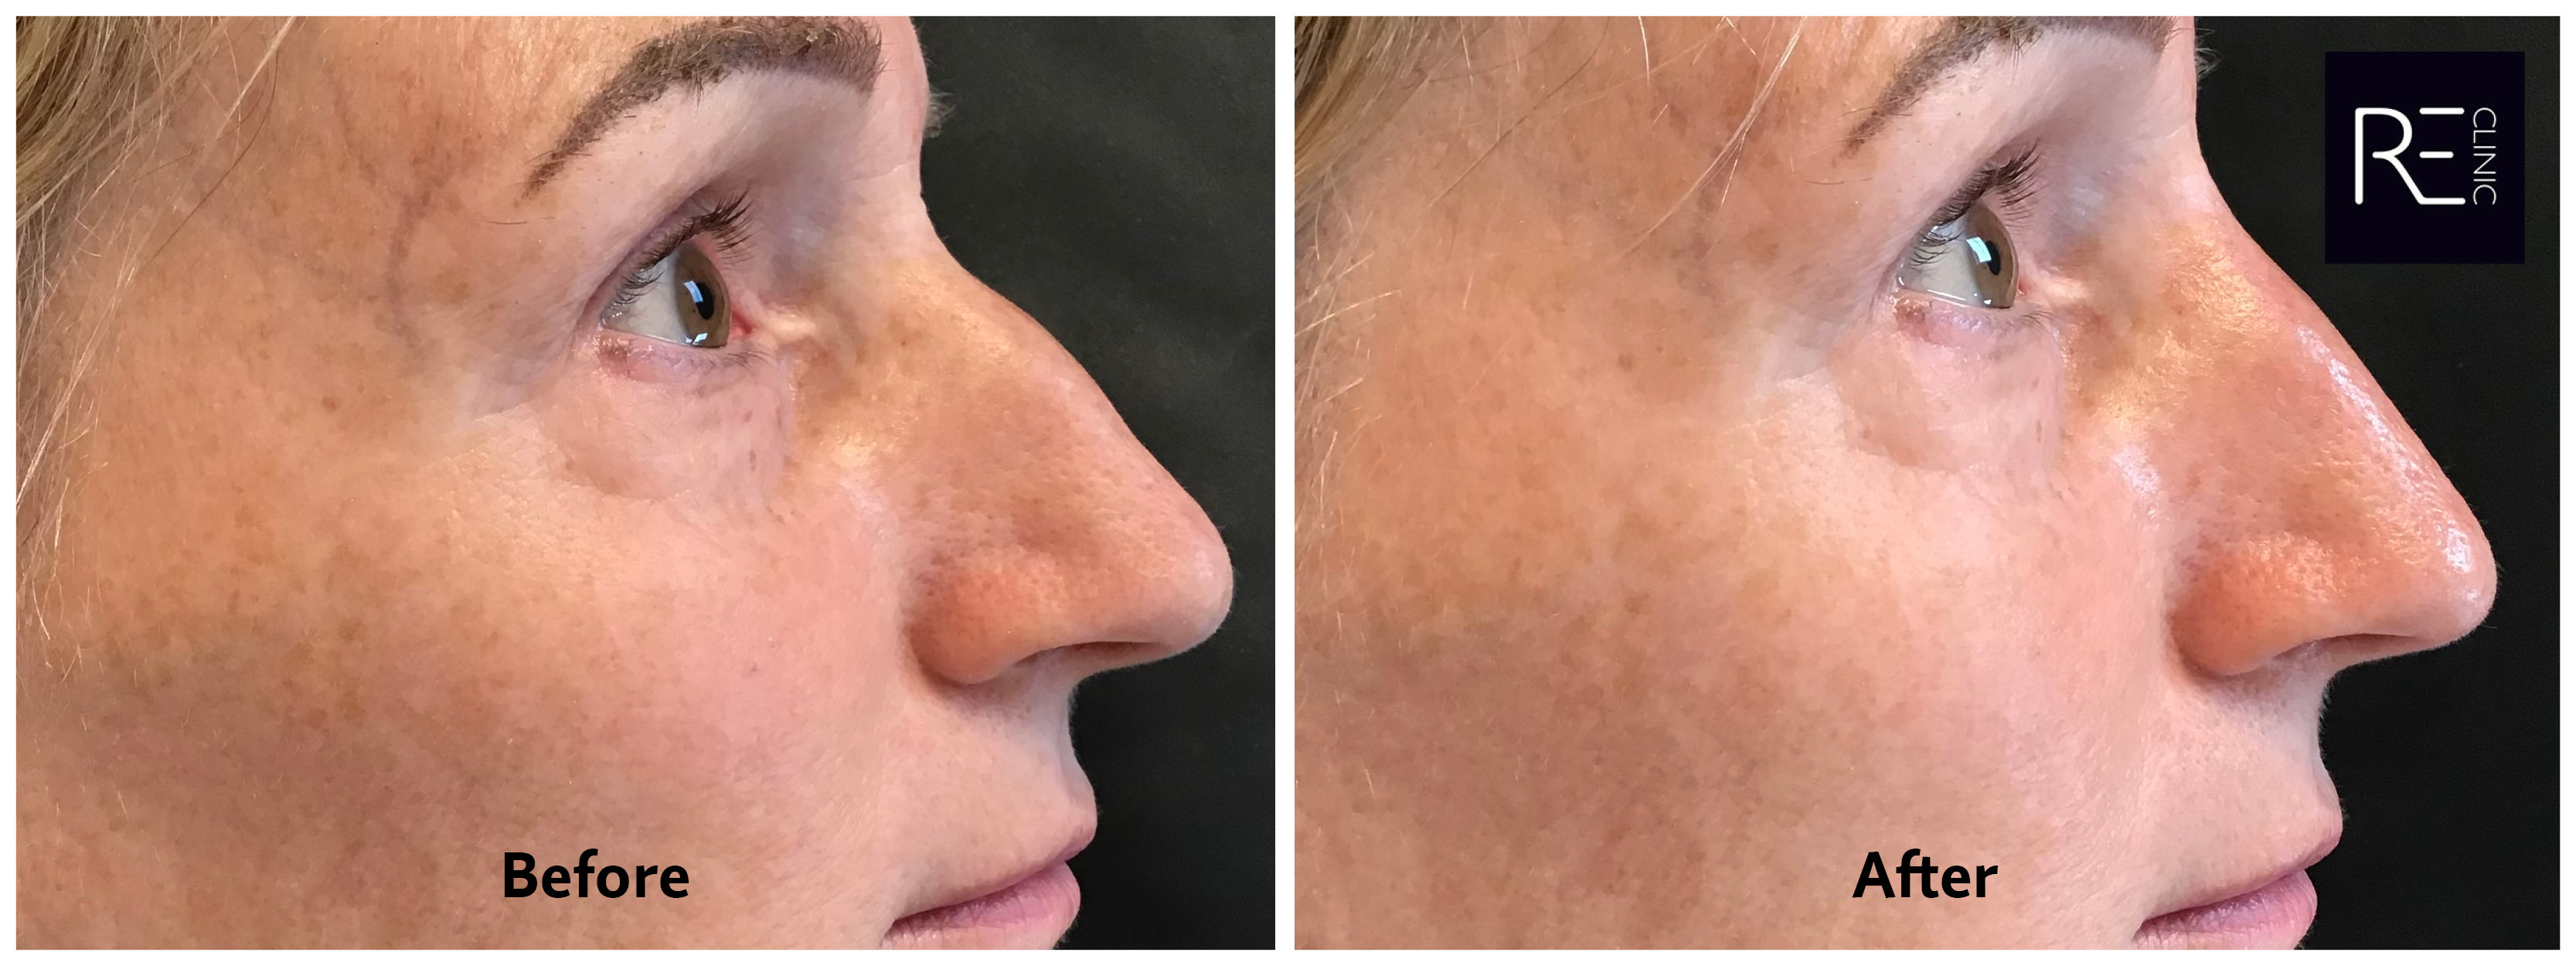 Non-surgical Rhinoplasty (nose job) at REclinic